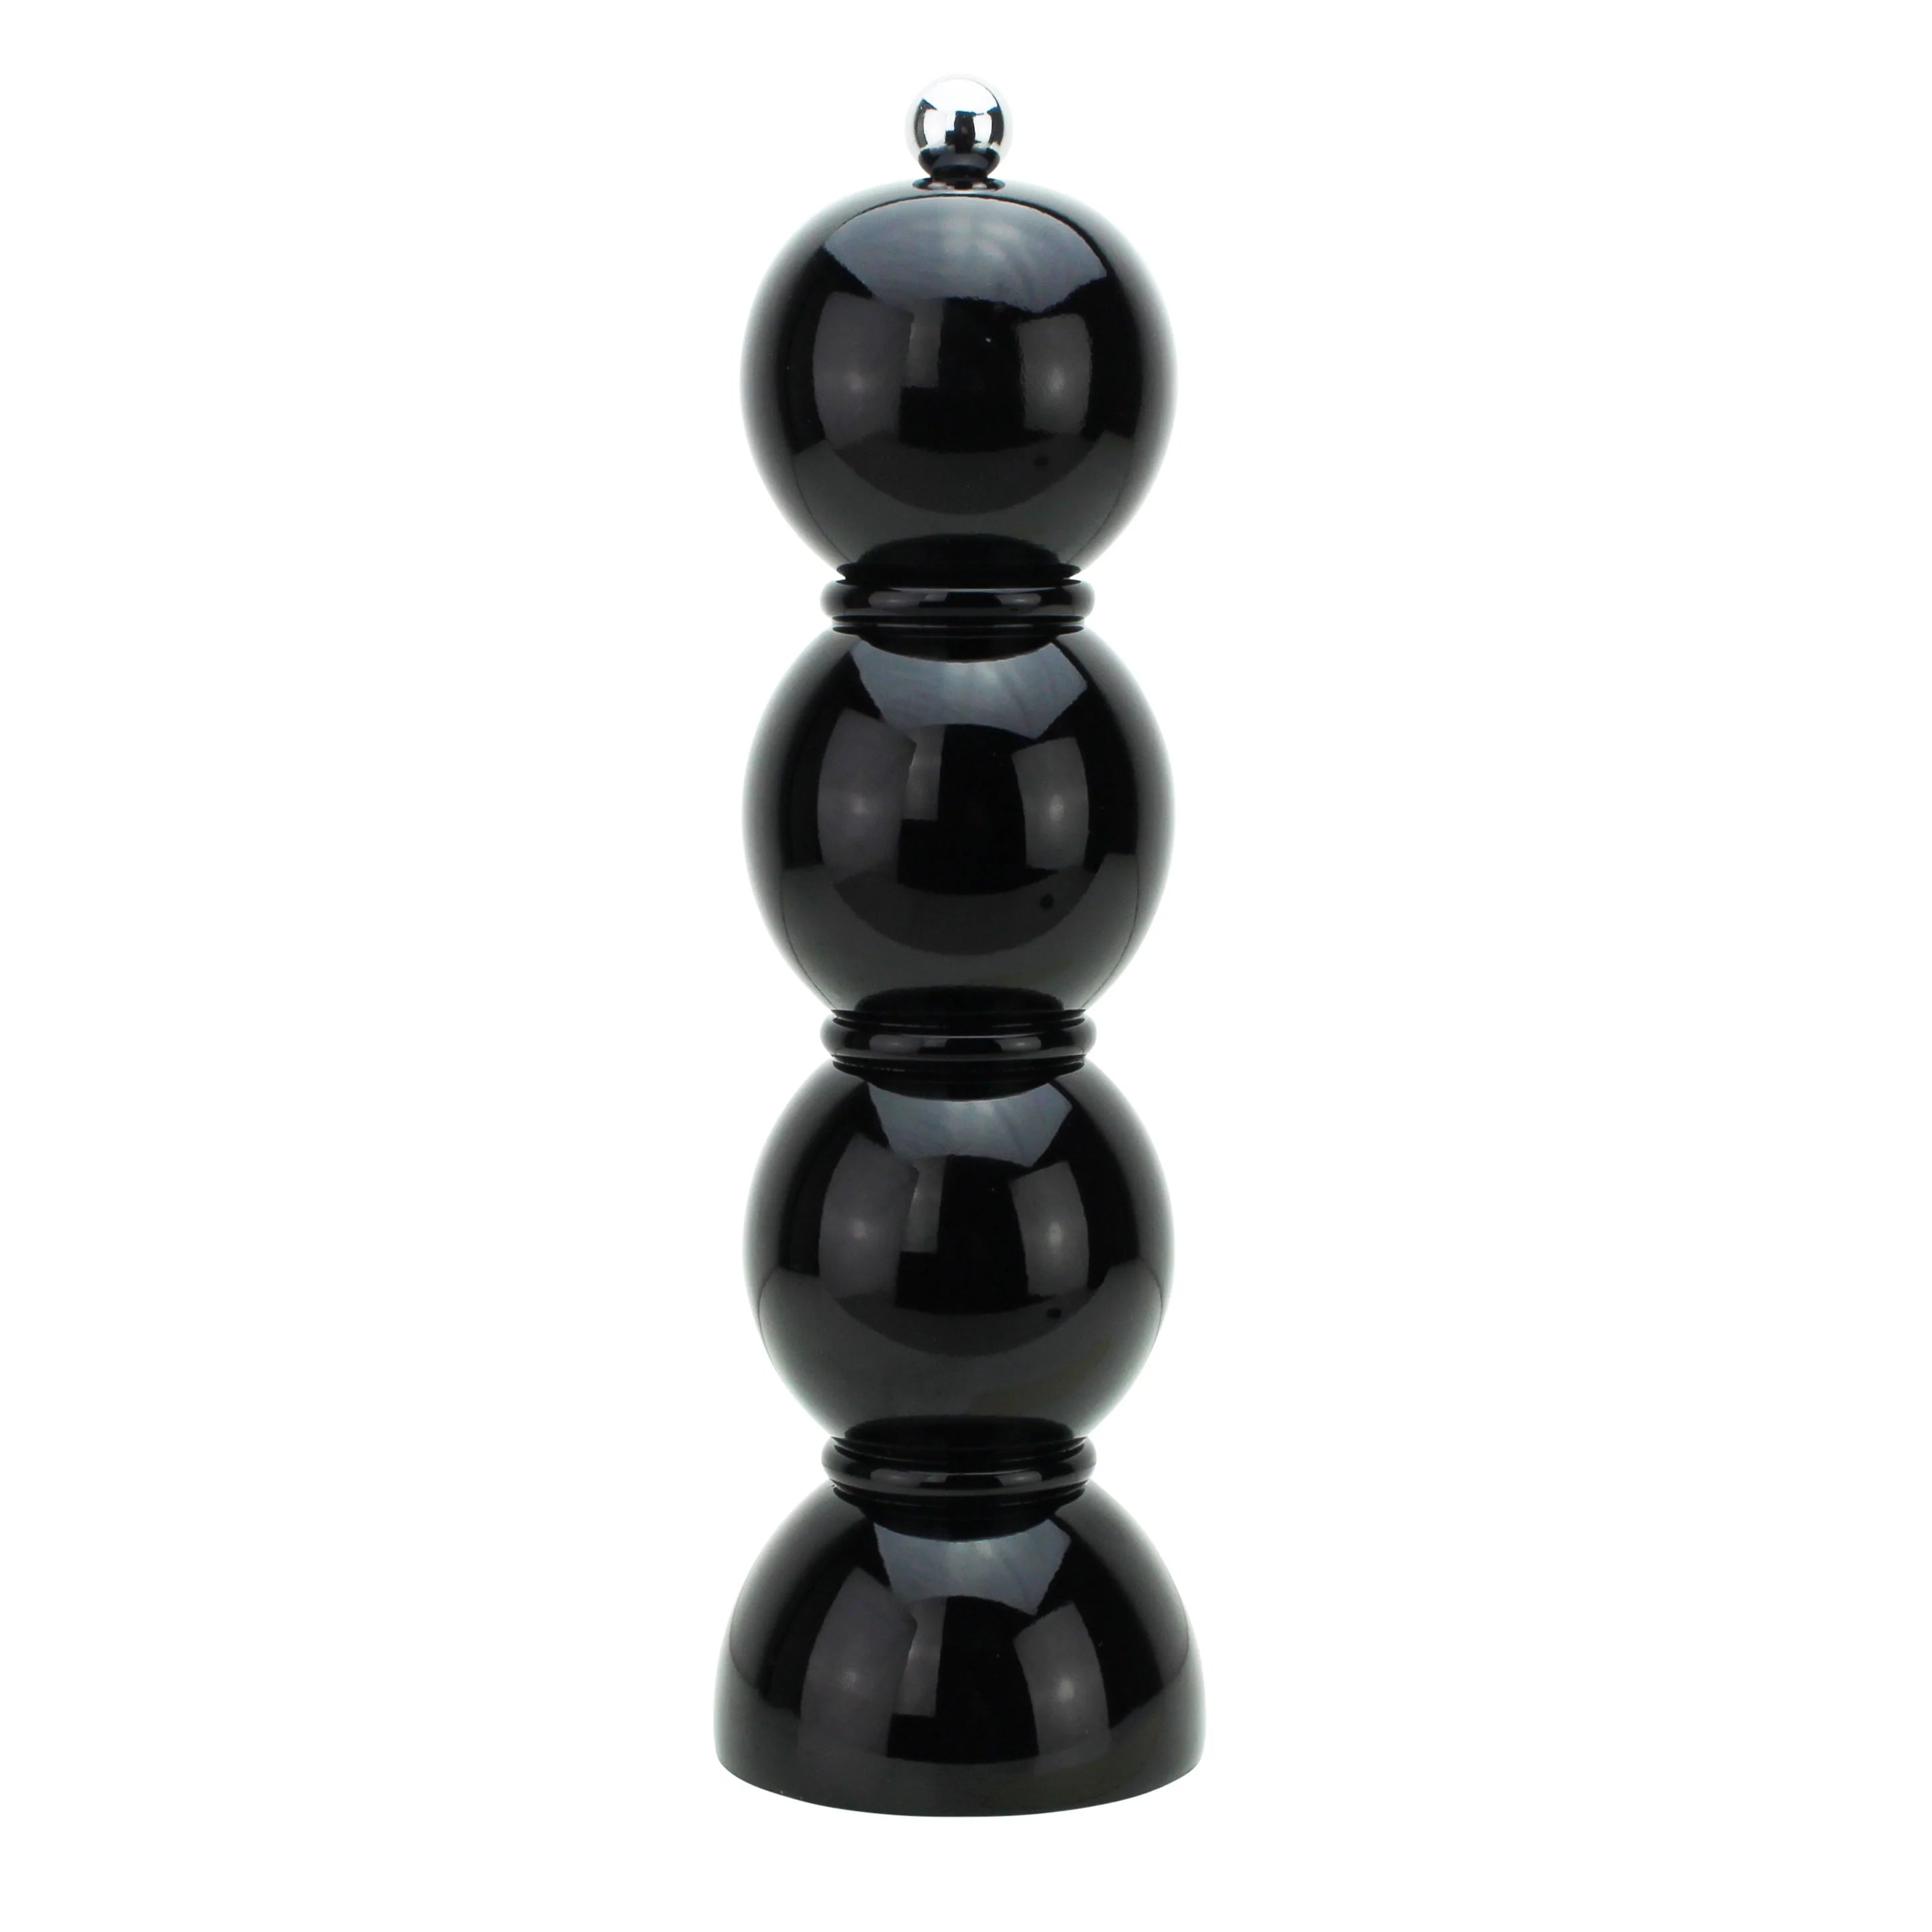 Lacquer Bobbin Salt or Pepper Mill Grinder - (eight colors)